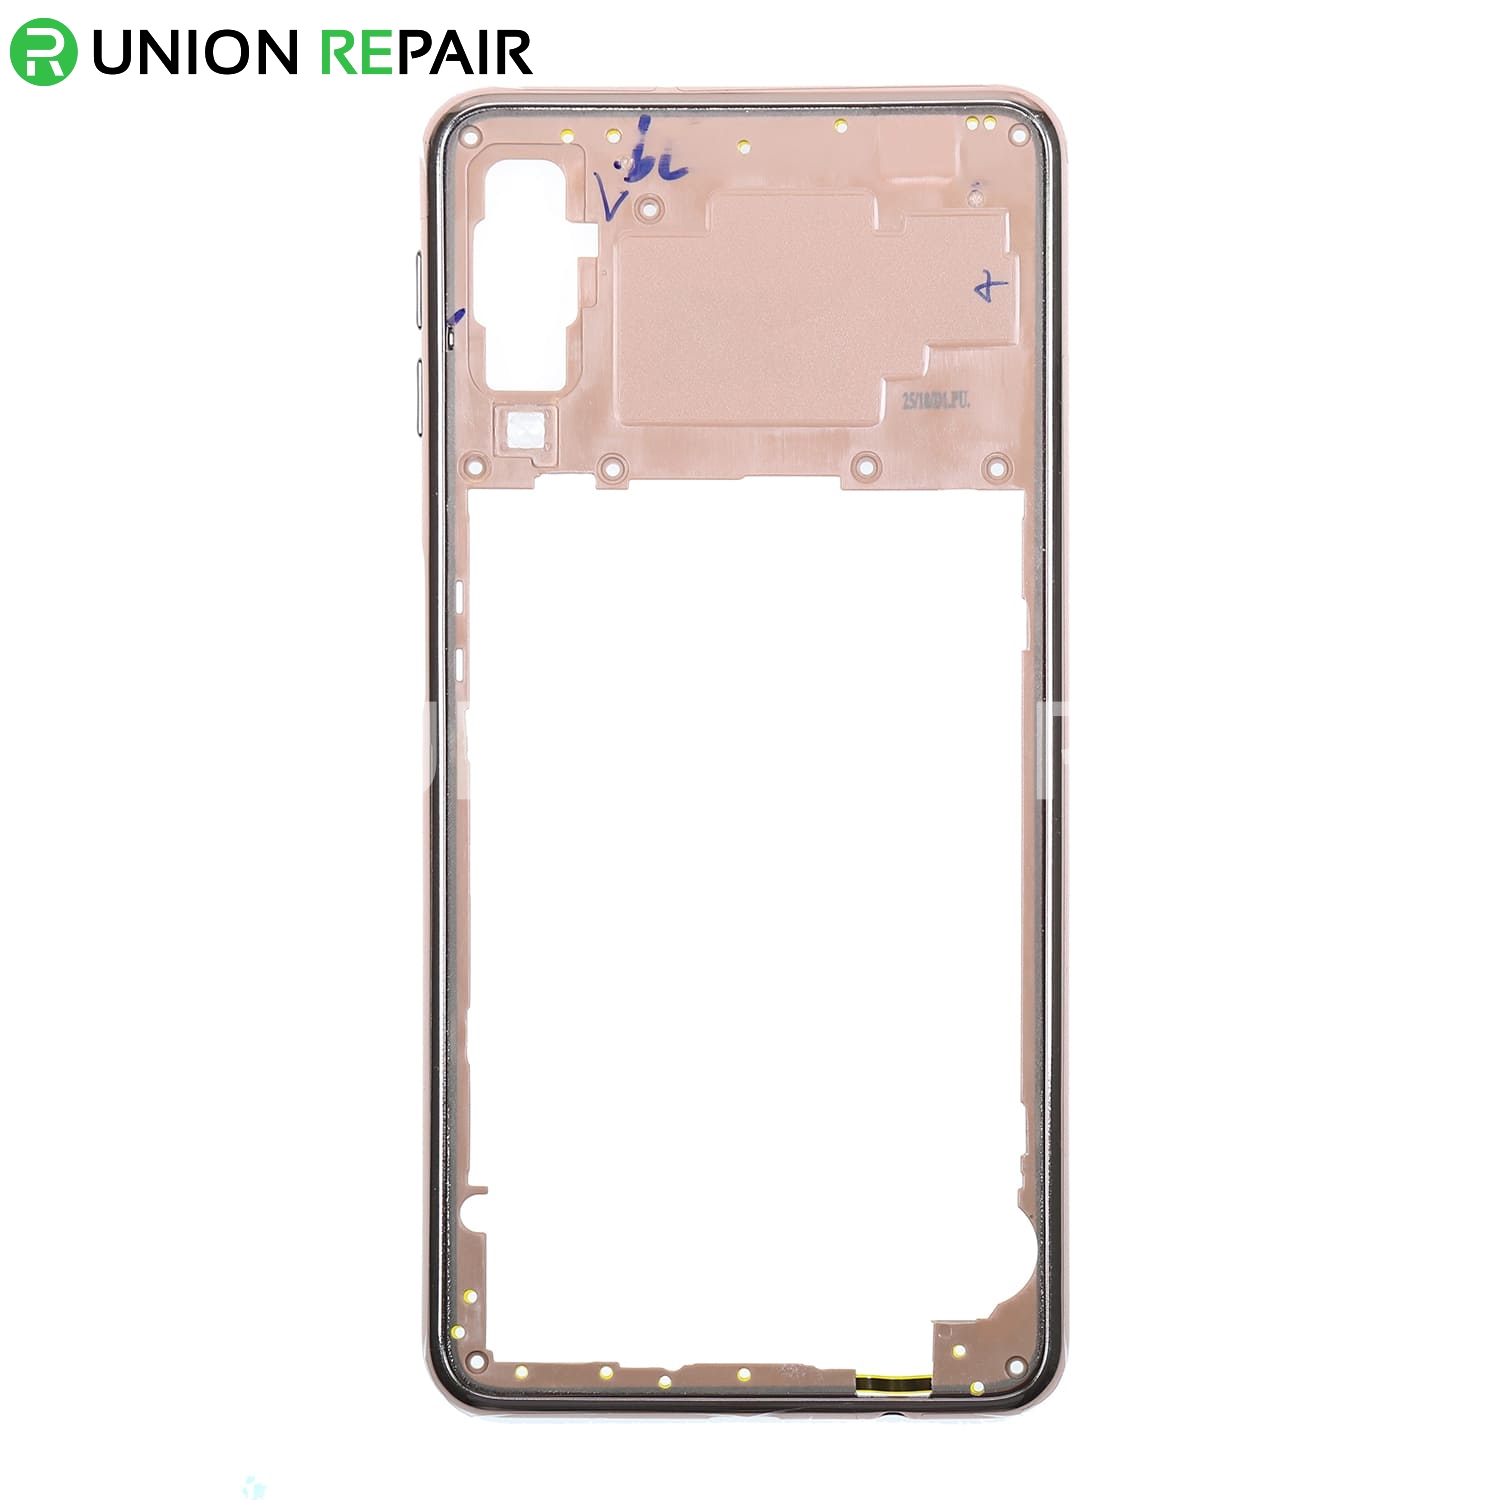 Replacement for Samsung Galaxy A7 (2018) SM-A750 Rear Housing - Gold